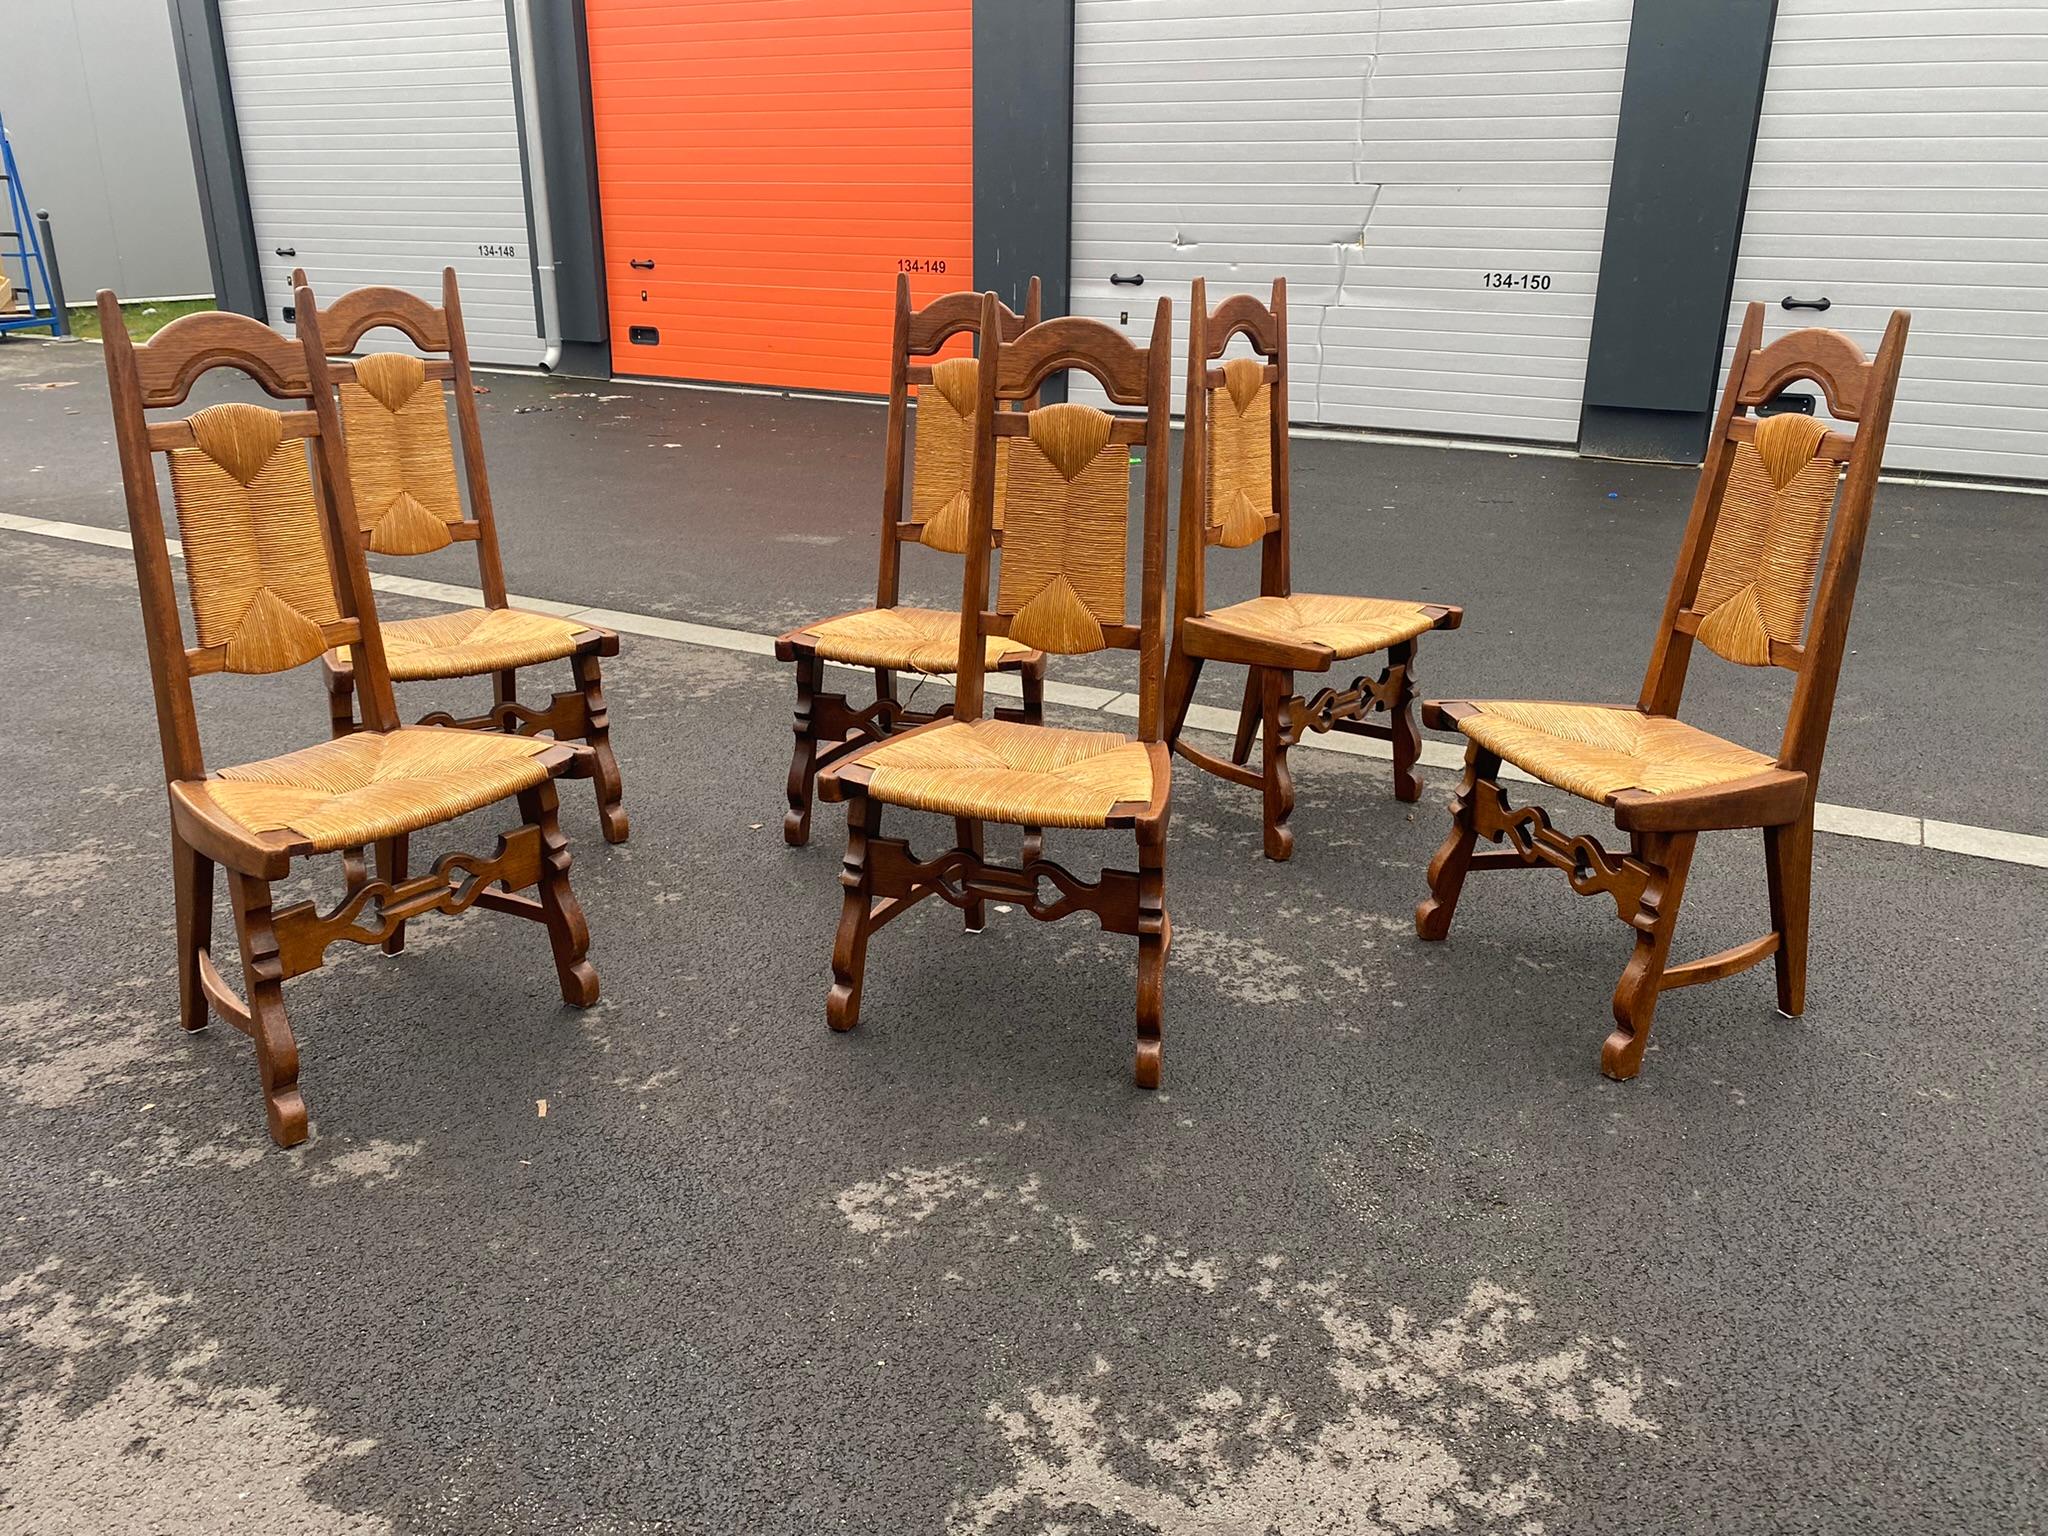 6 oak neo rustic chairs circa 1950/1960
Good general condition, a little wear on the straw varnish.